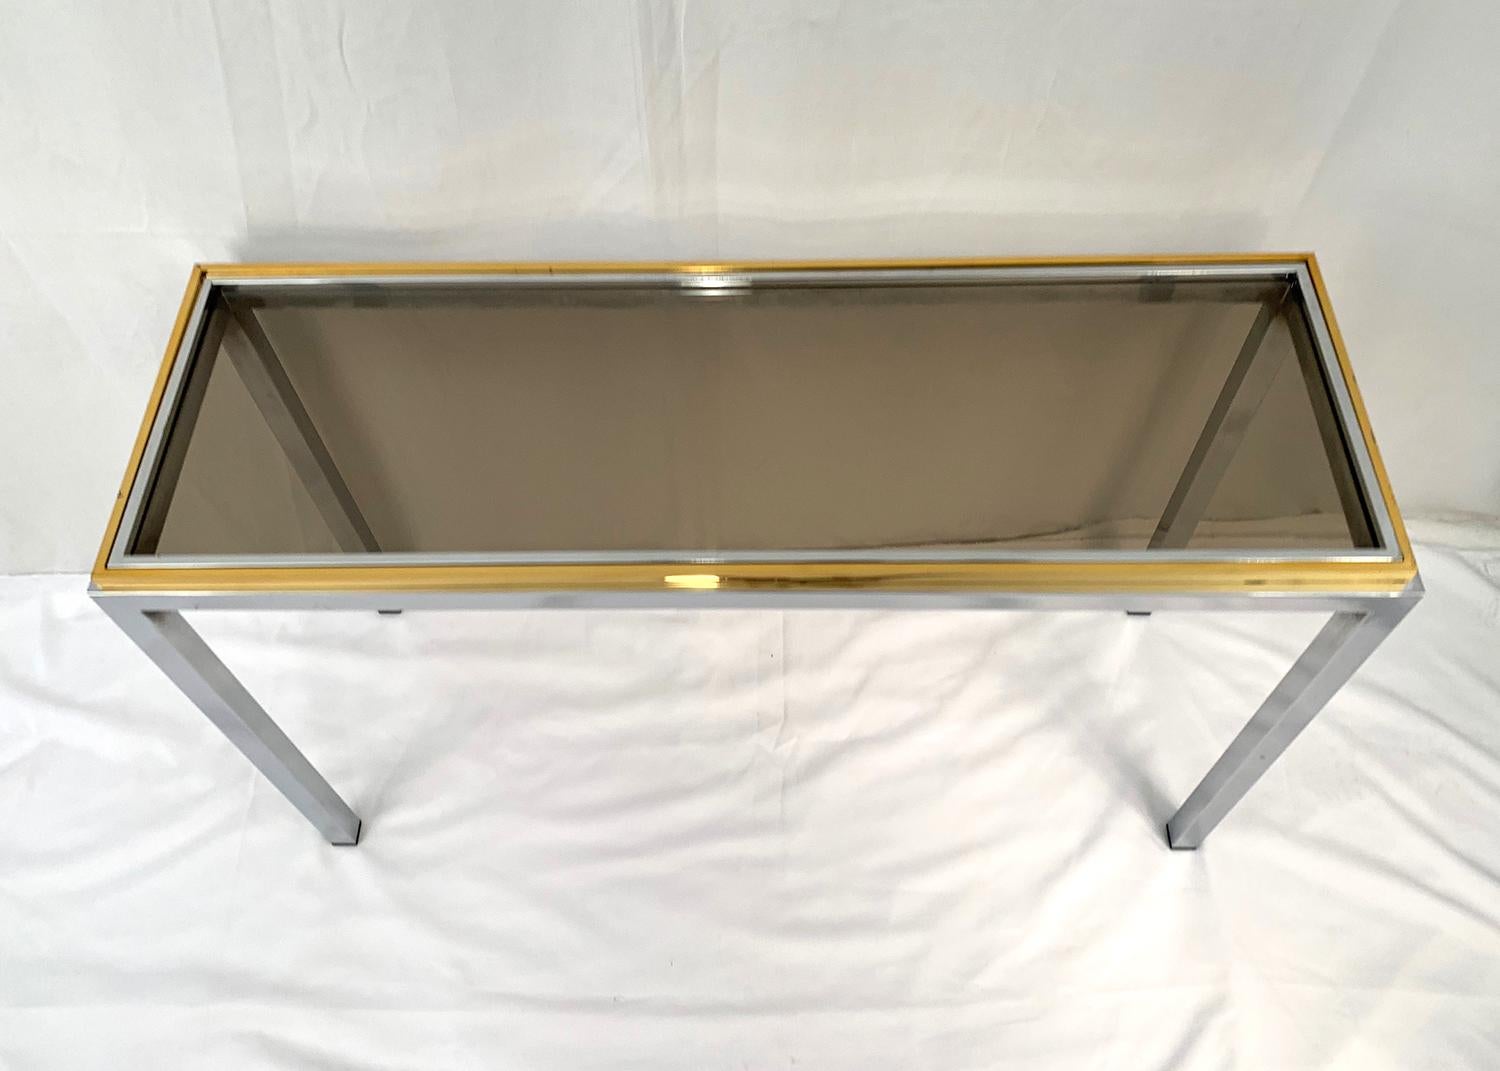 Splendid console in chromed metal and brass designed by Willy Rizzo for Linea Flaminia, 1970s.

Splendide console en métal chromé et laiton dessiné par Willy Rizzo pour Linea Flaminia, 1970s.